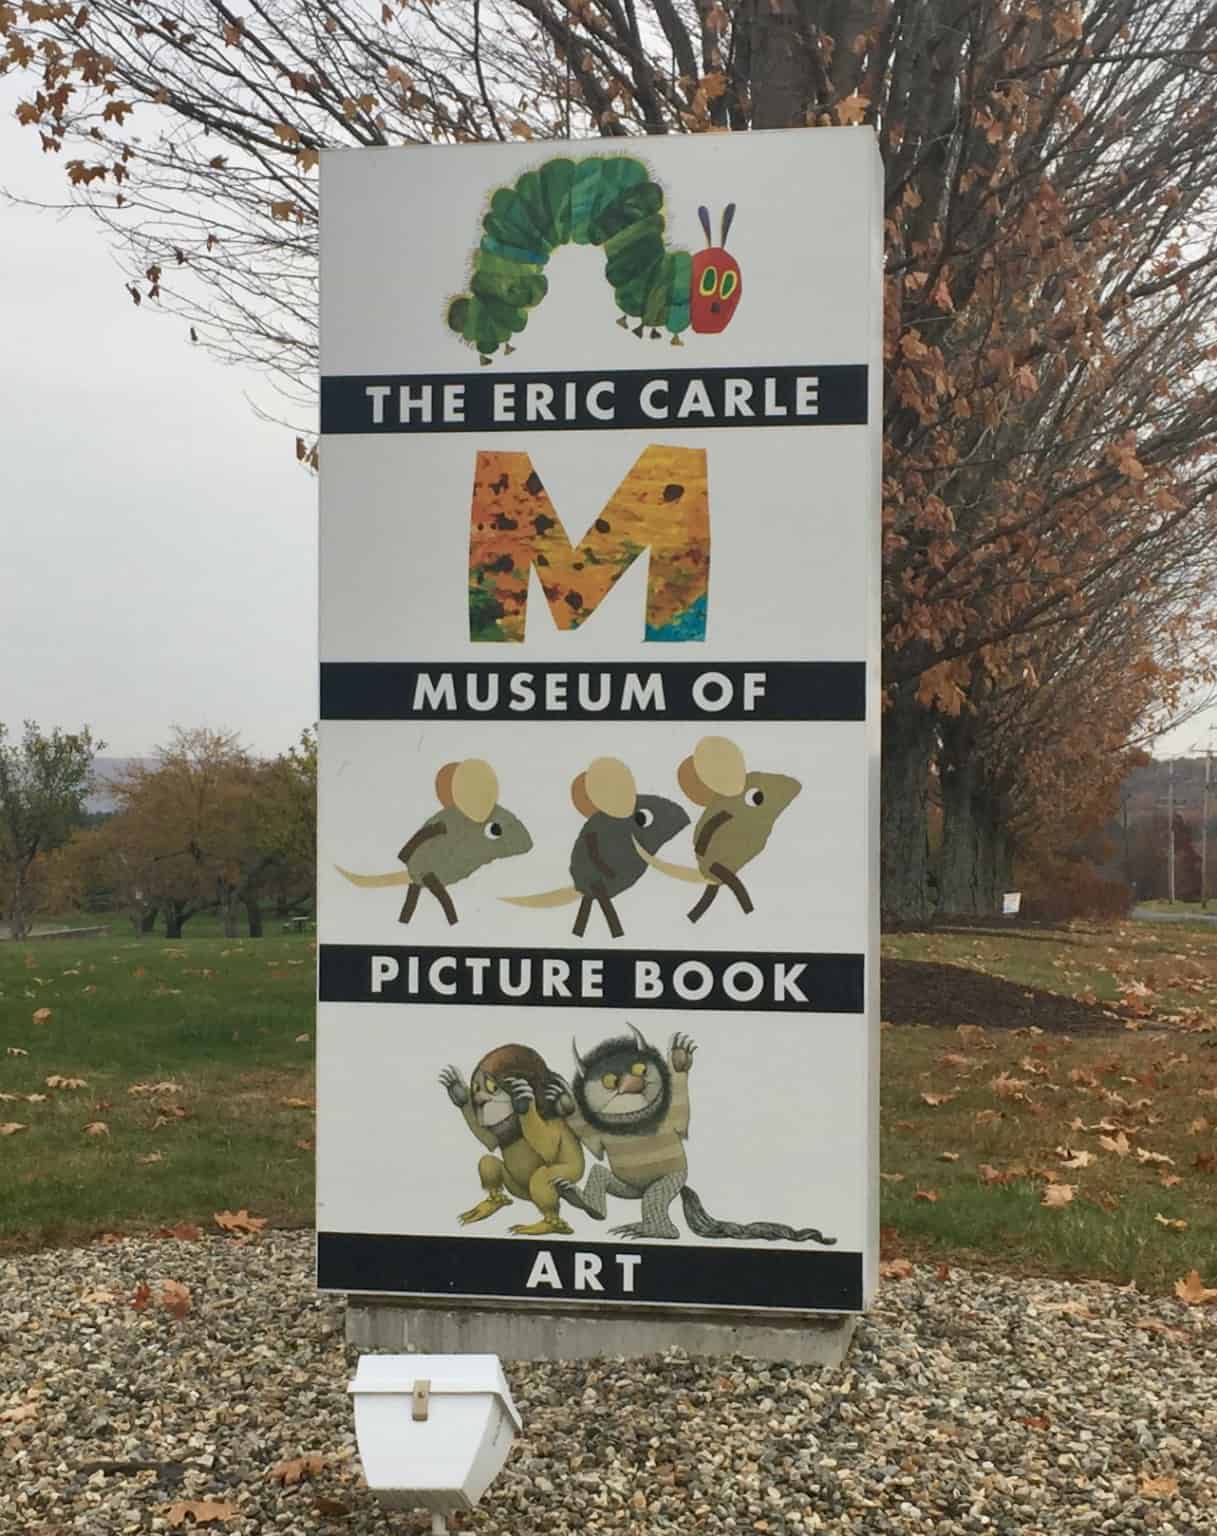 Eric Carle Storybook Museum of Art featuring the works of Carle and other famous picture book artists